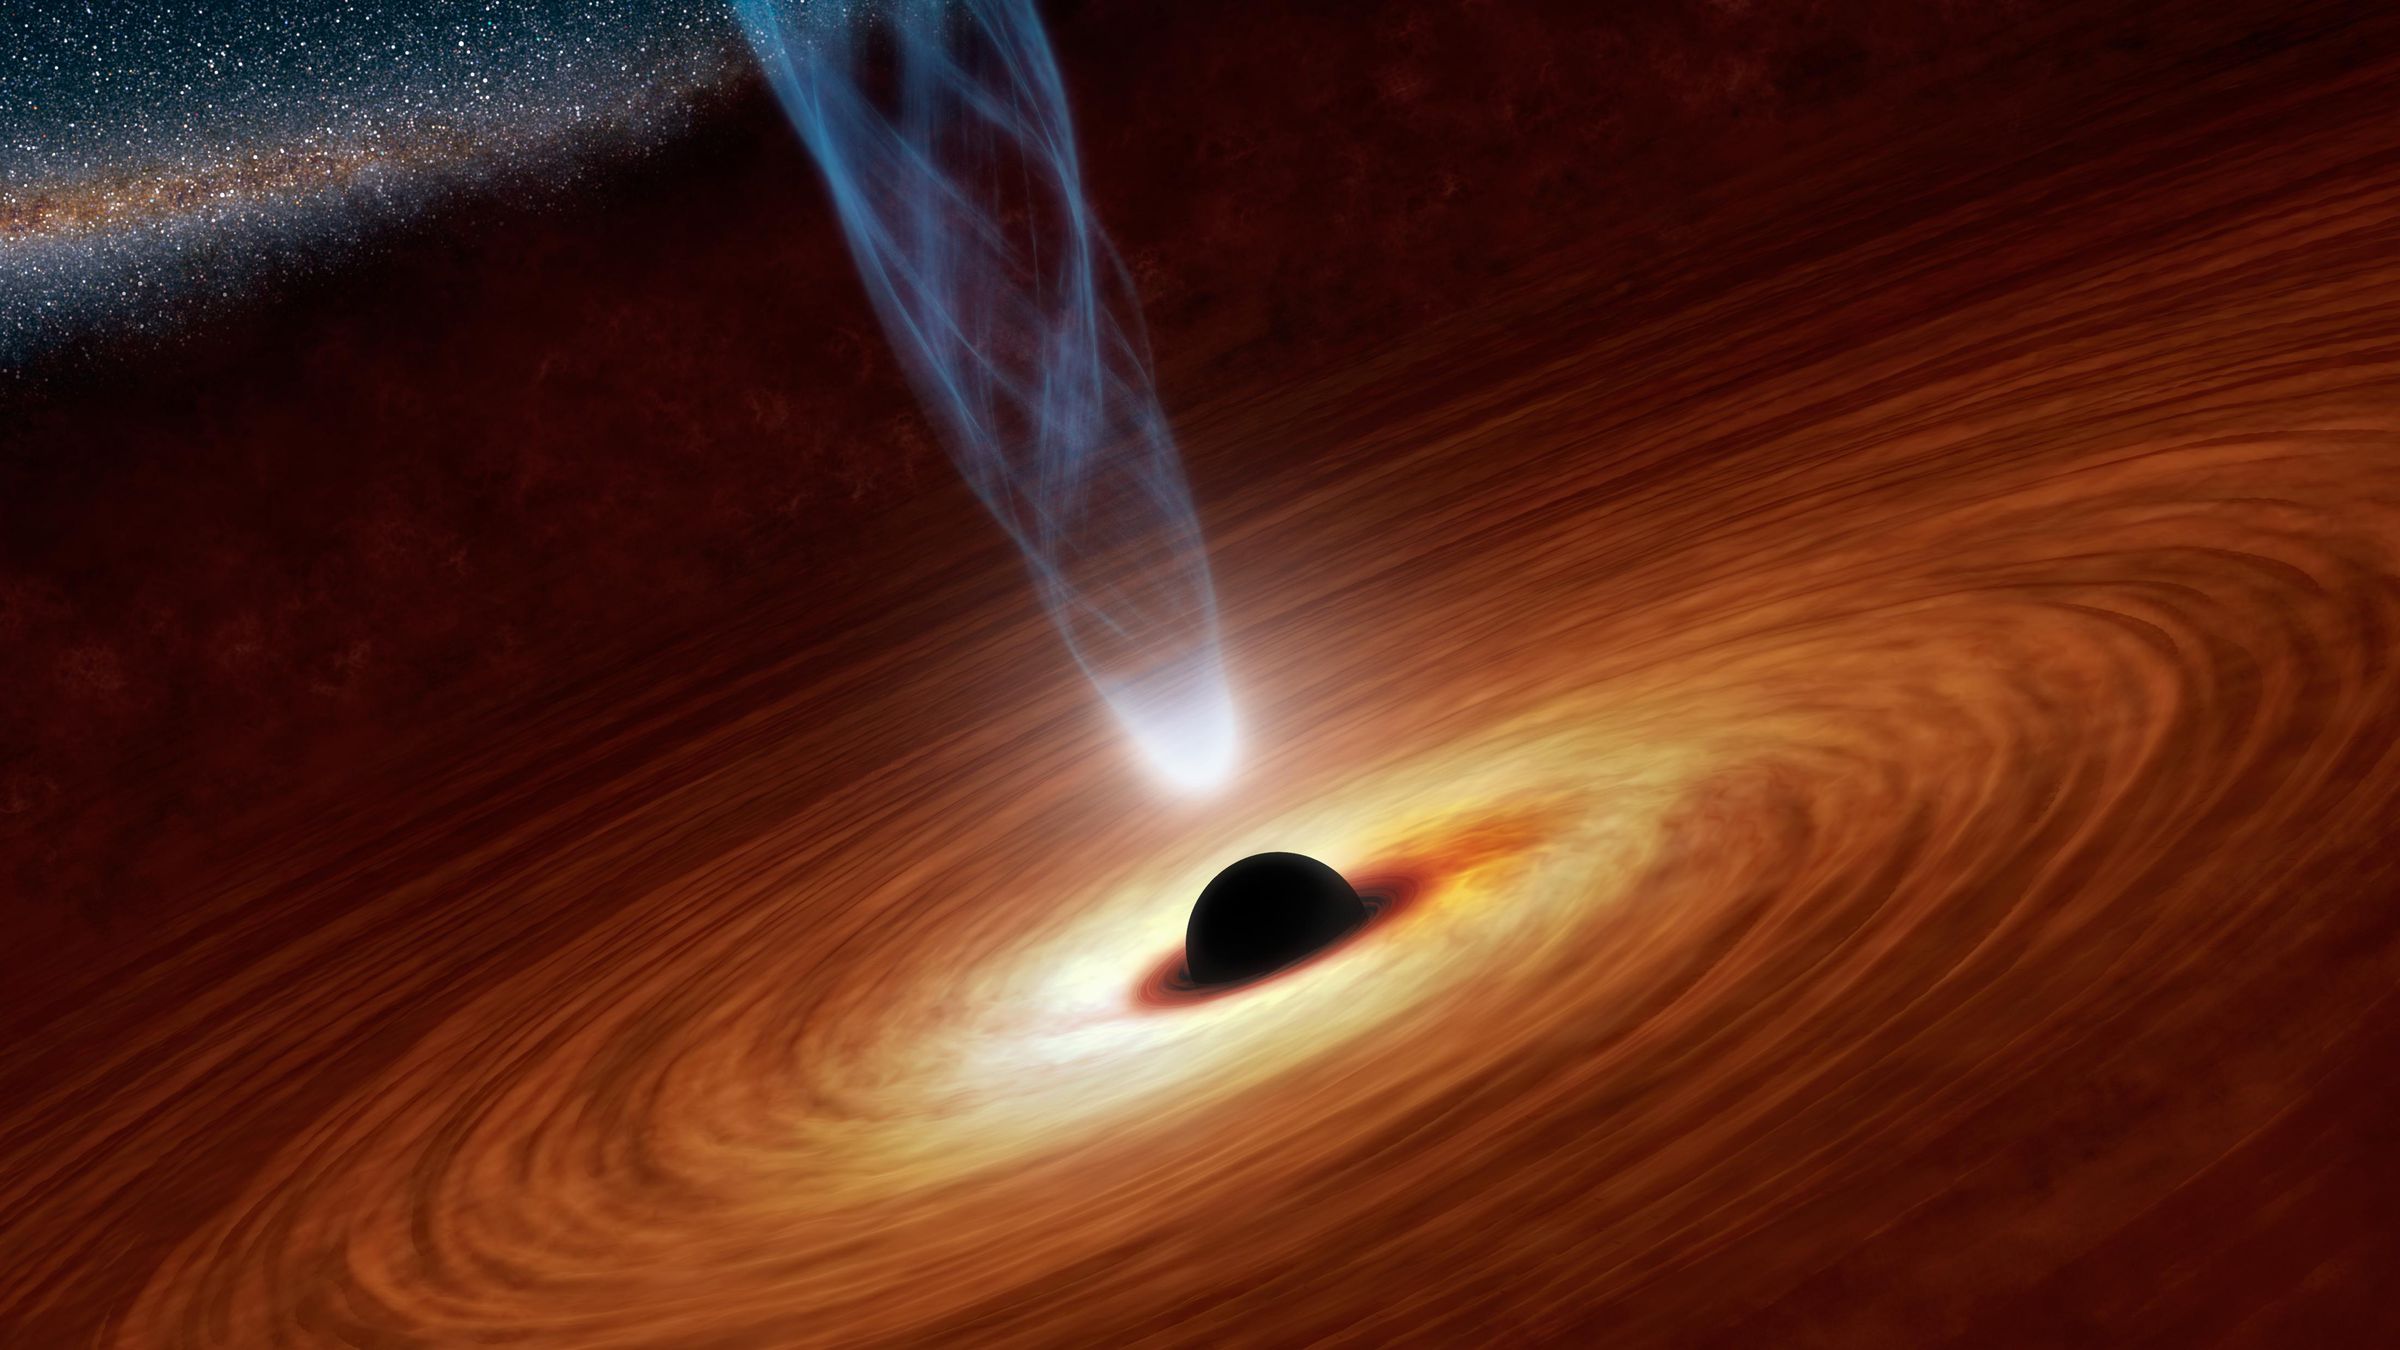 An artistic rendering of a black hole, surrounded by a swirling disc of hot gas and plasma